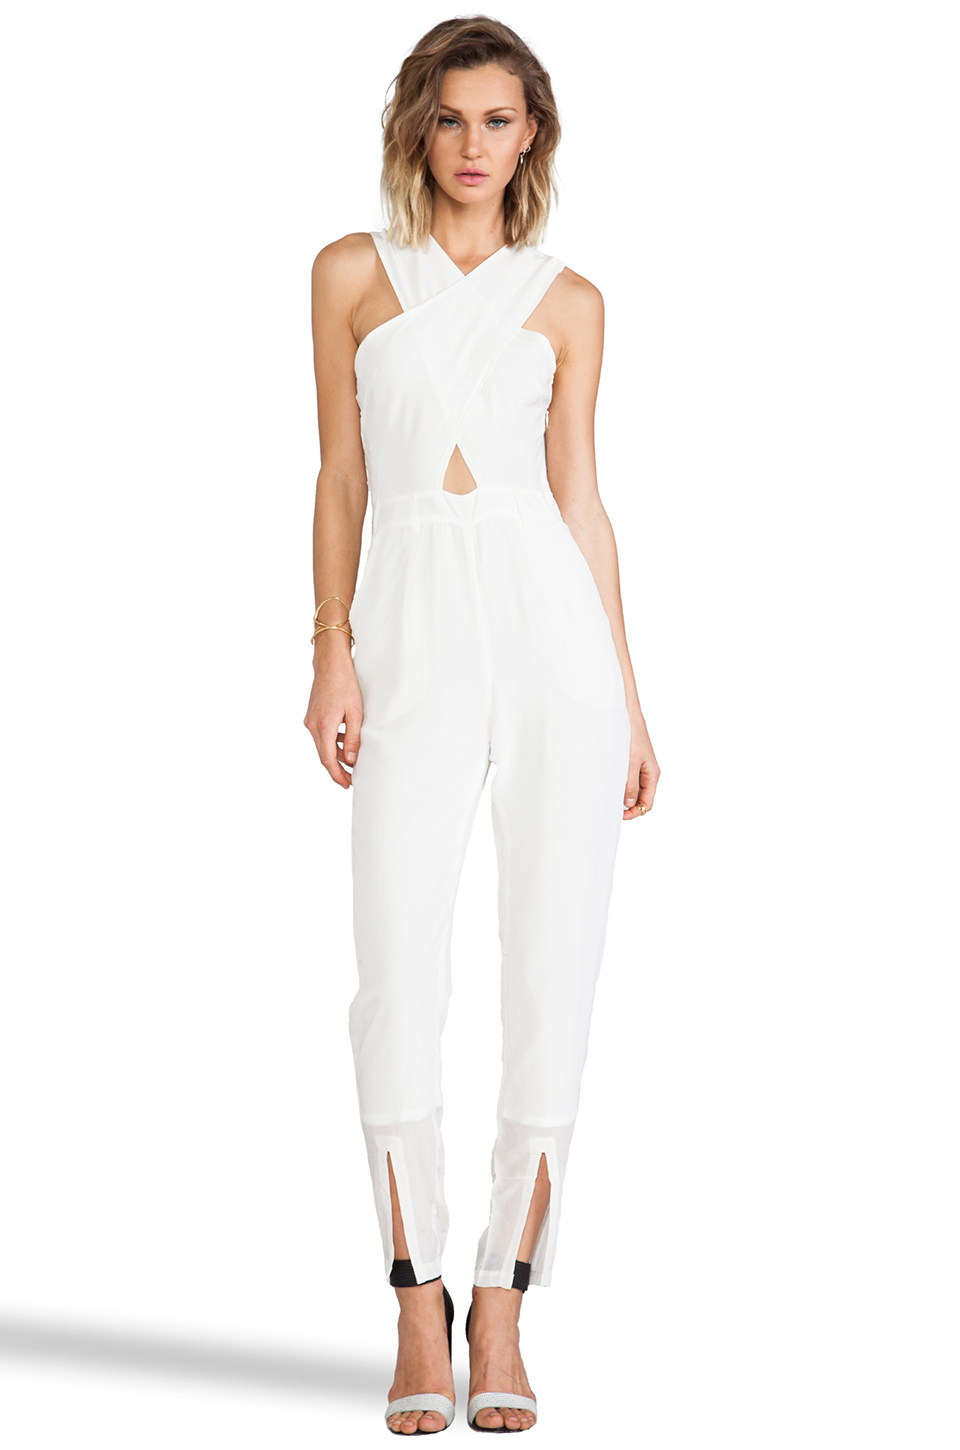 Lyst - Maurie & Eve Glow Jumpsuit in White